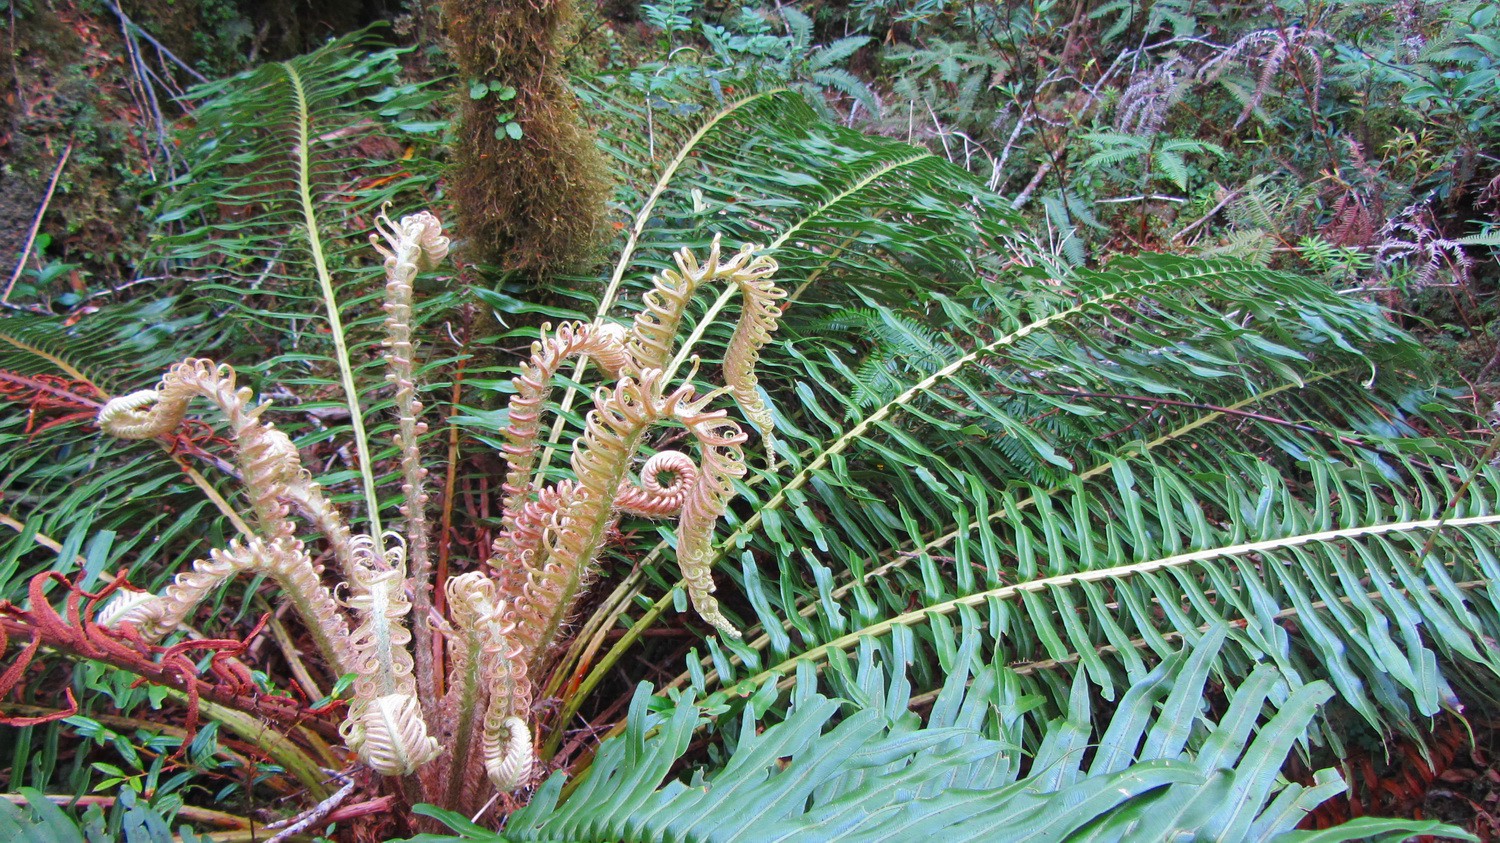 Large plant in the cold rainforest of the Parque Pumalin